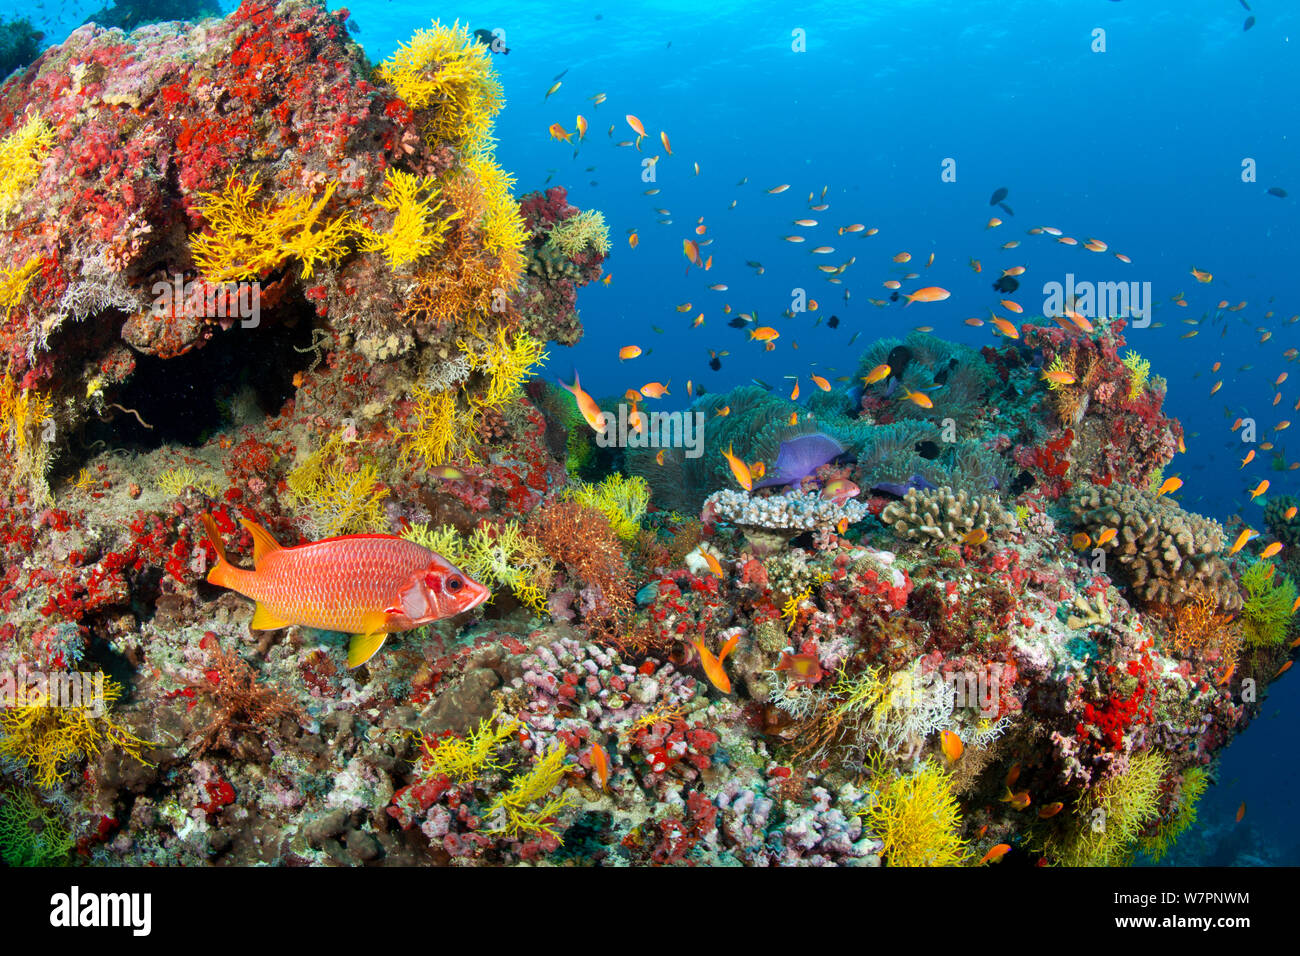 Coral reef teeming with life, Maldives, Indian Ocean Stock Photo